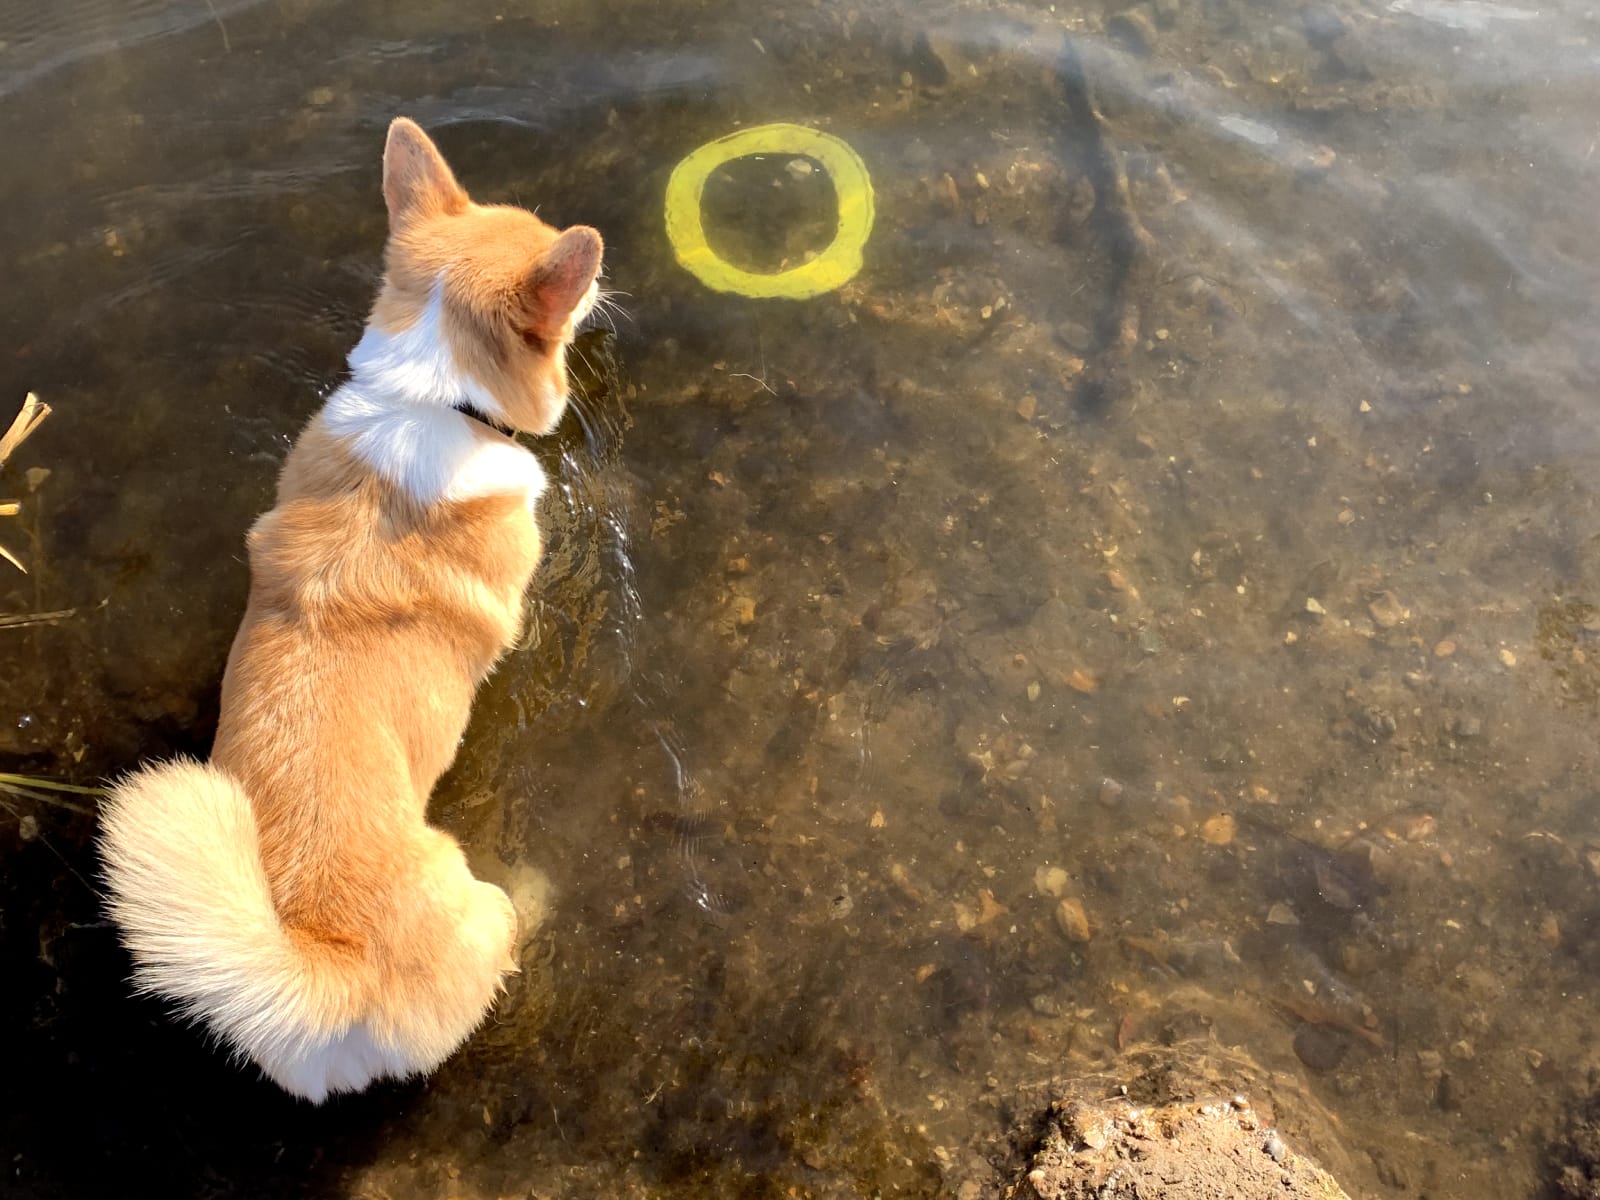 Bird’s eye view of a corgi looking at a yellow throwing disc at the bottom of a clear, shallow lake